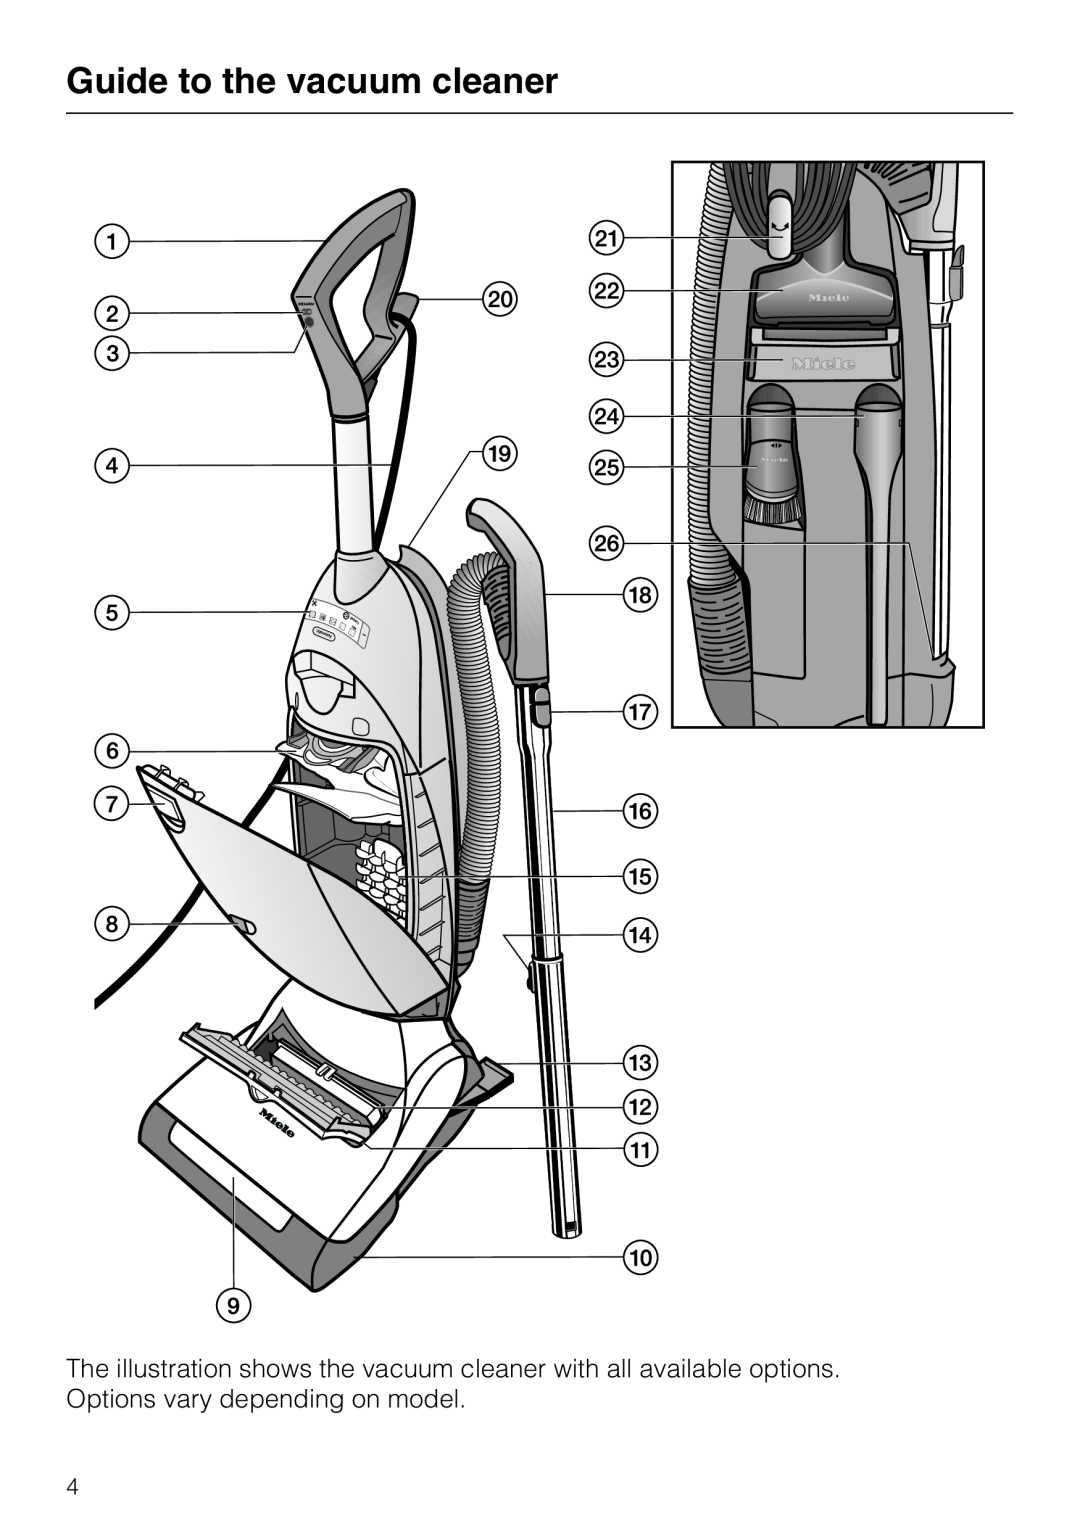 Miele HS08, M-NR09753 090 operating instructions Guide to the vacuum cleaner 